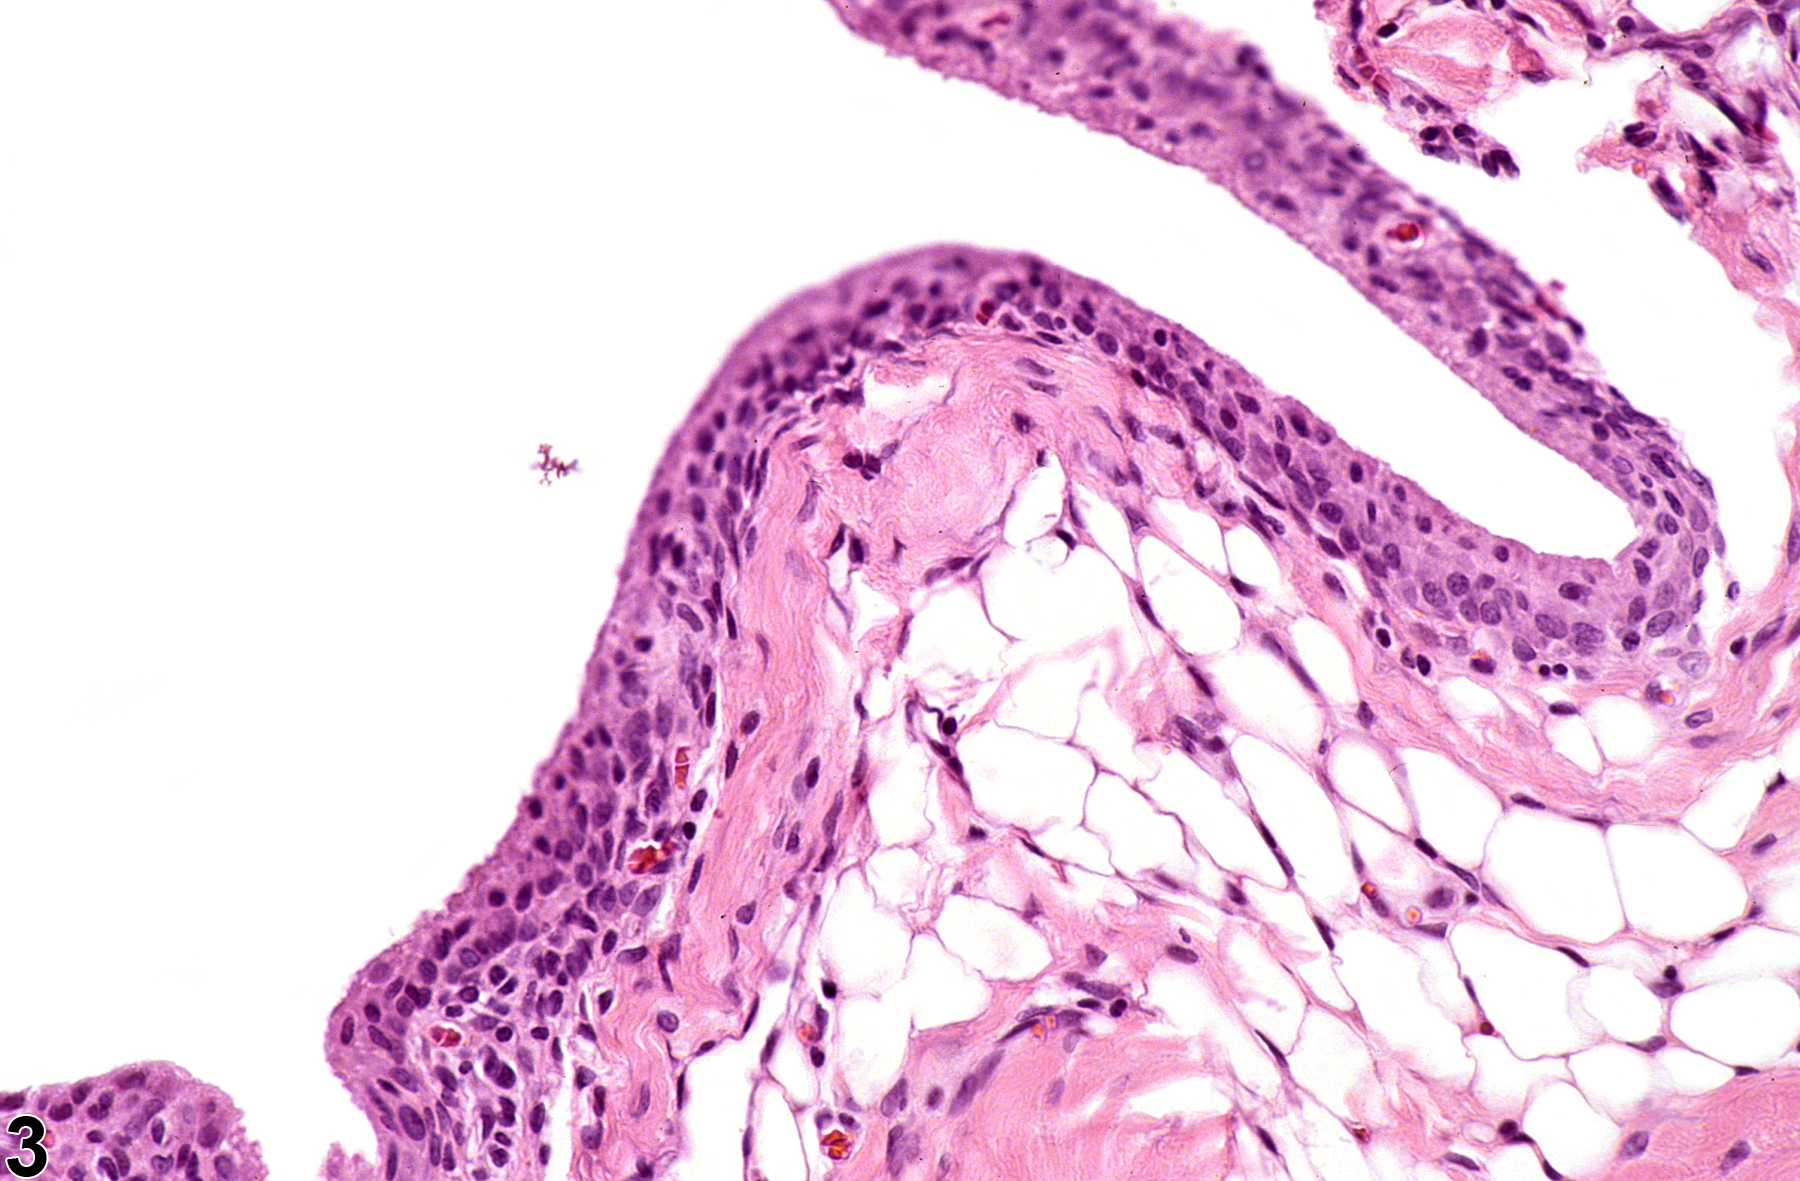 Image of joint degeneration in the bone from a male B6C3F1/N mouse in a chronic study